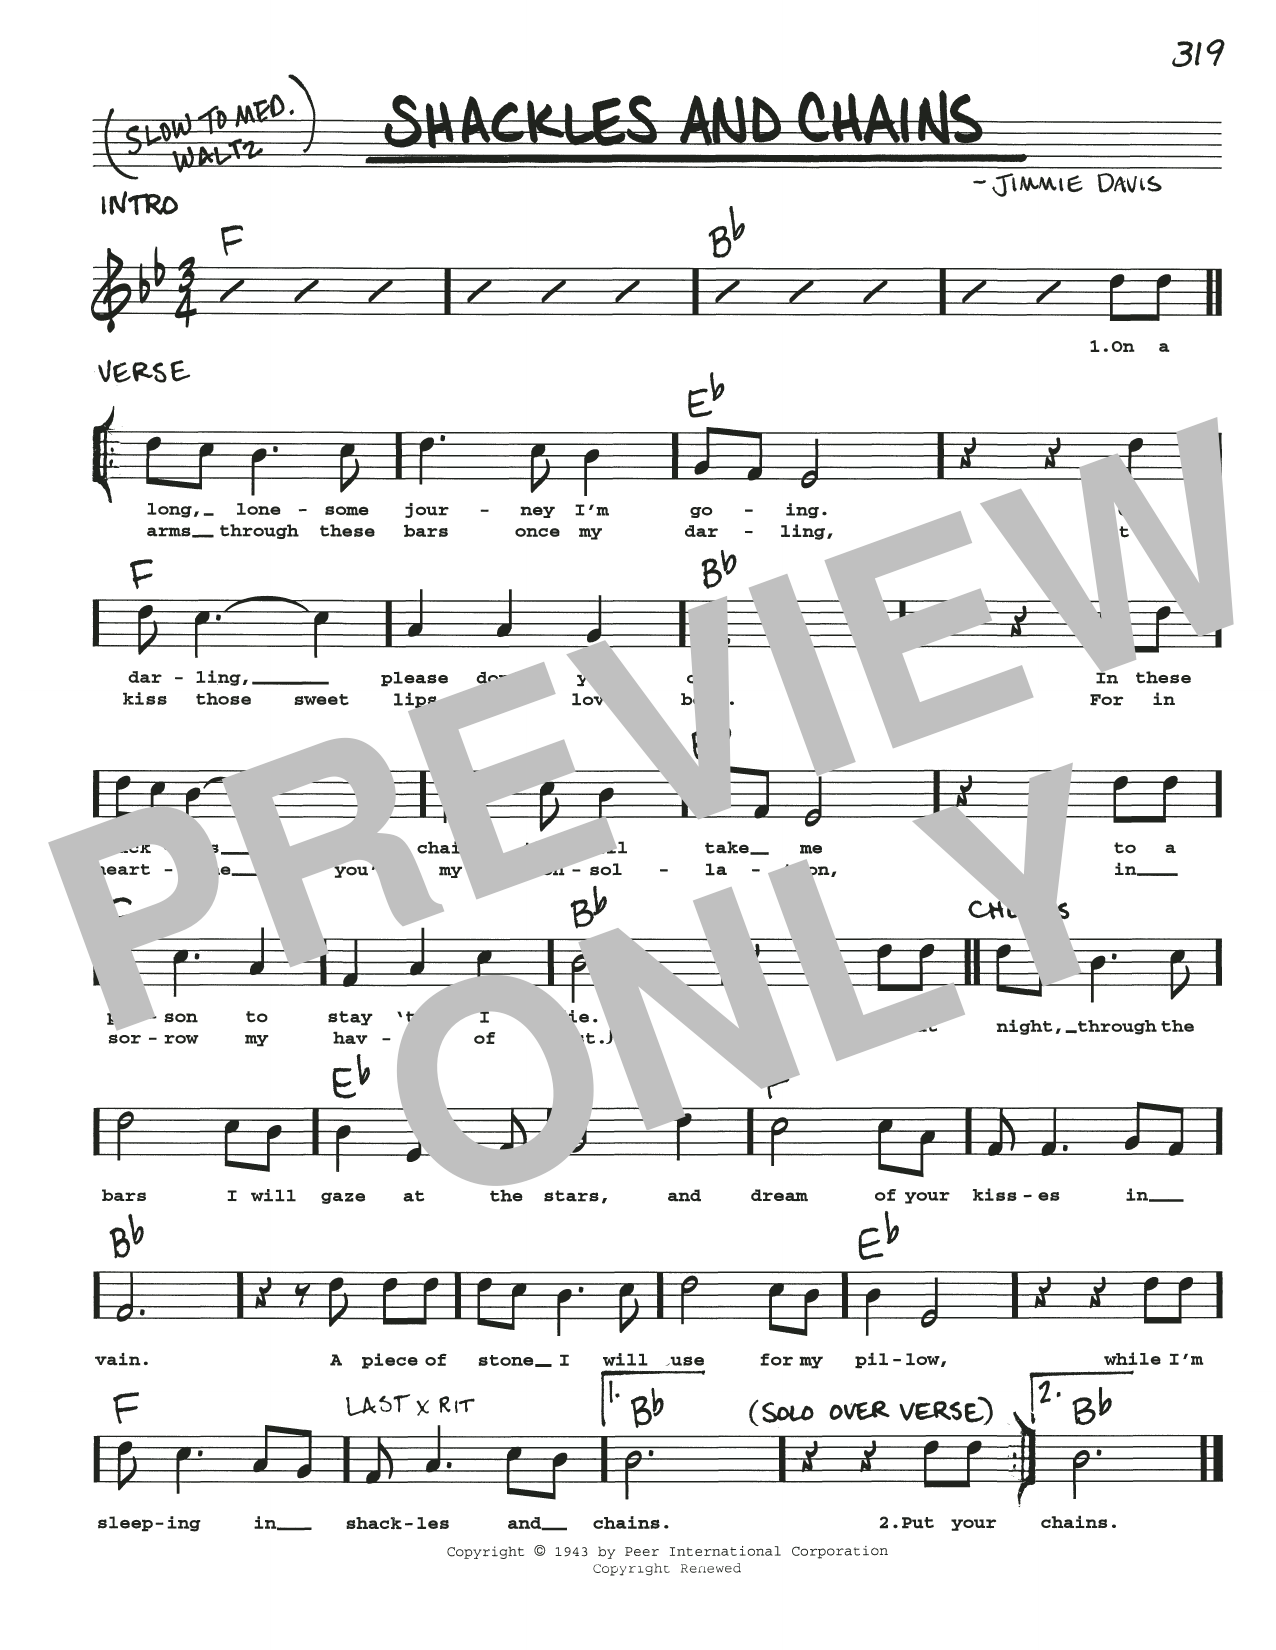 Download Jimmie Davis Shackles And Chains Sheet Music